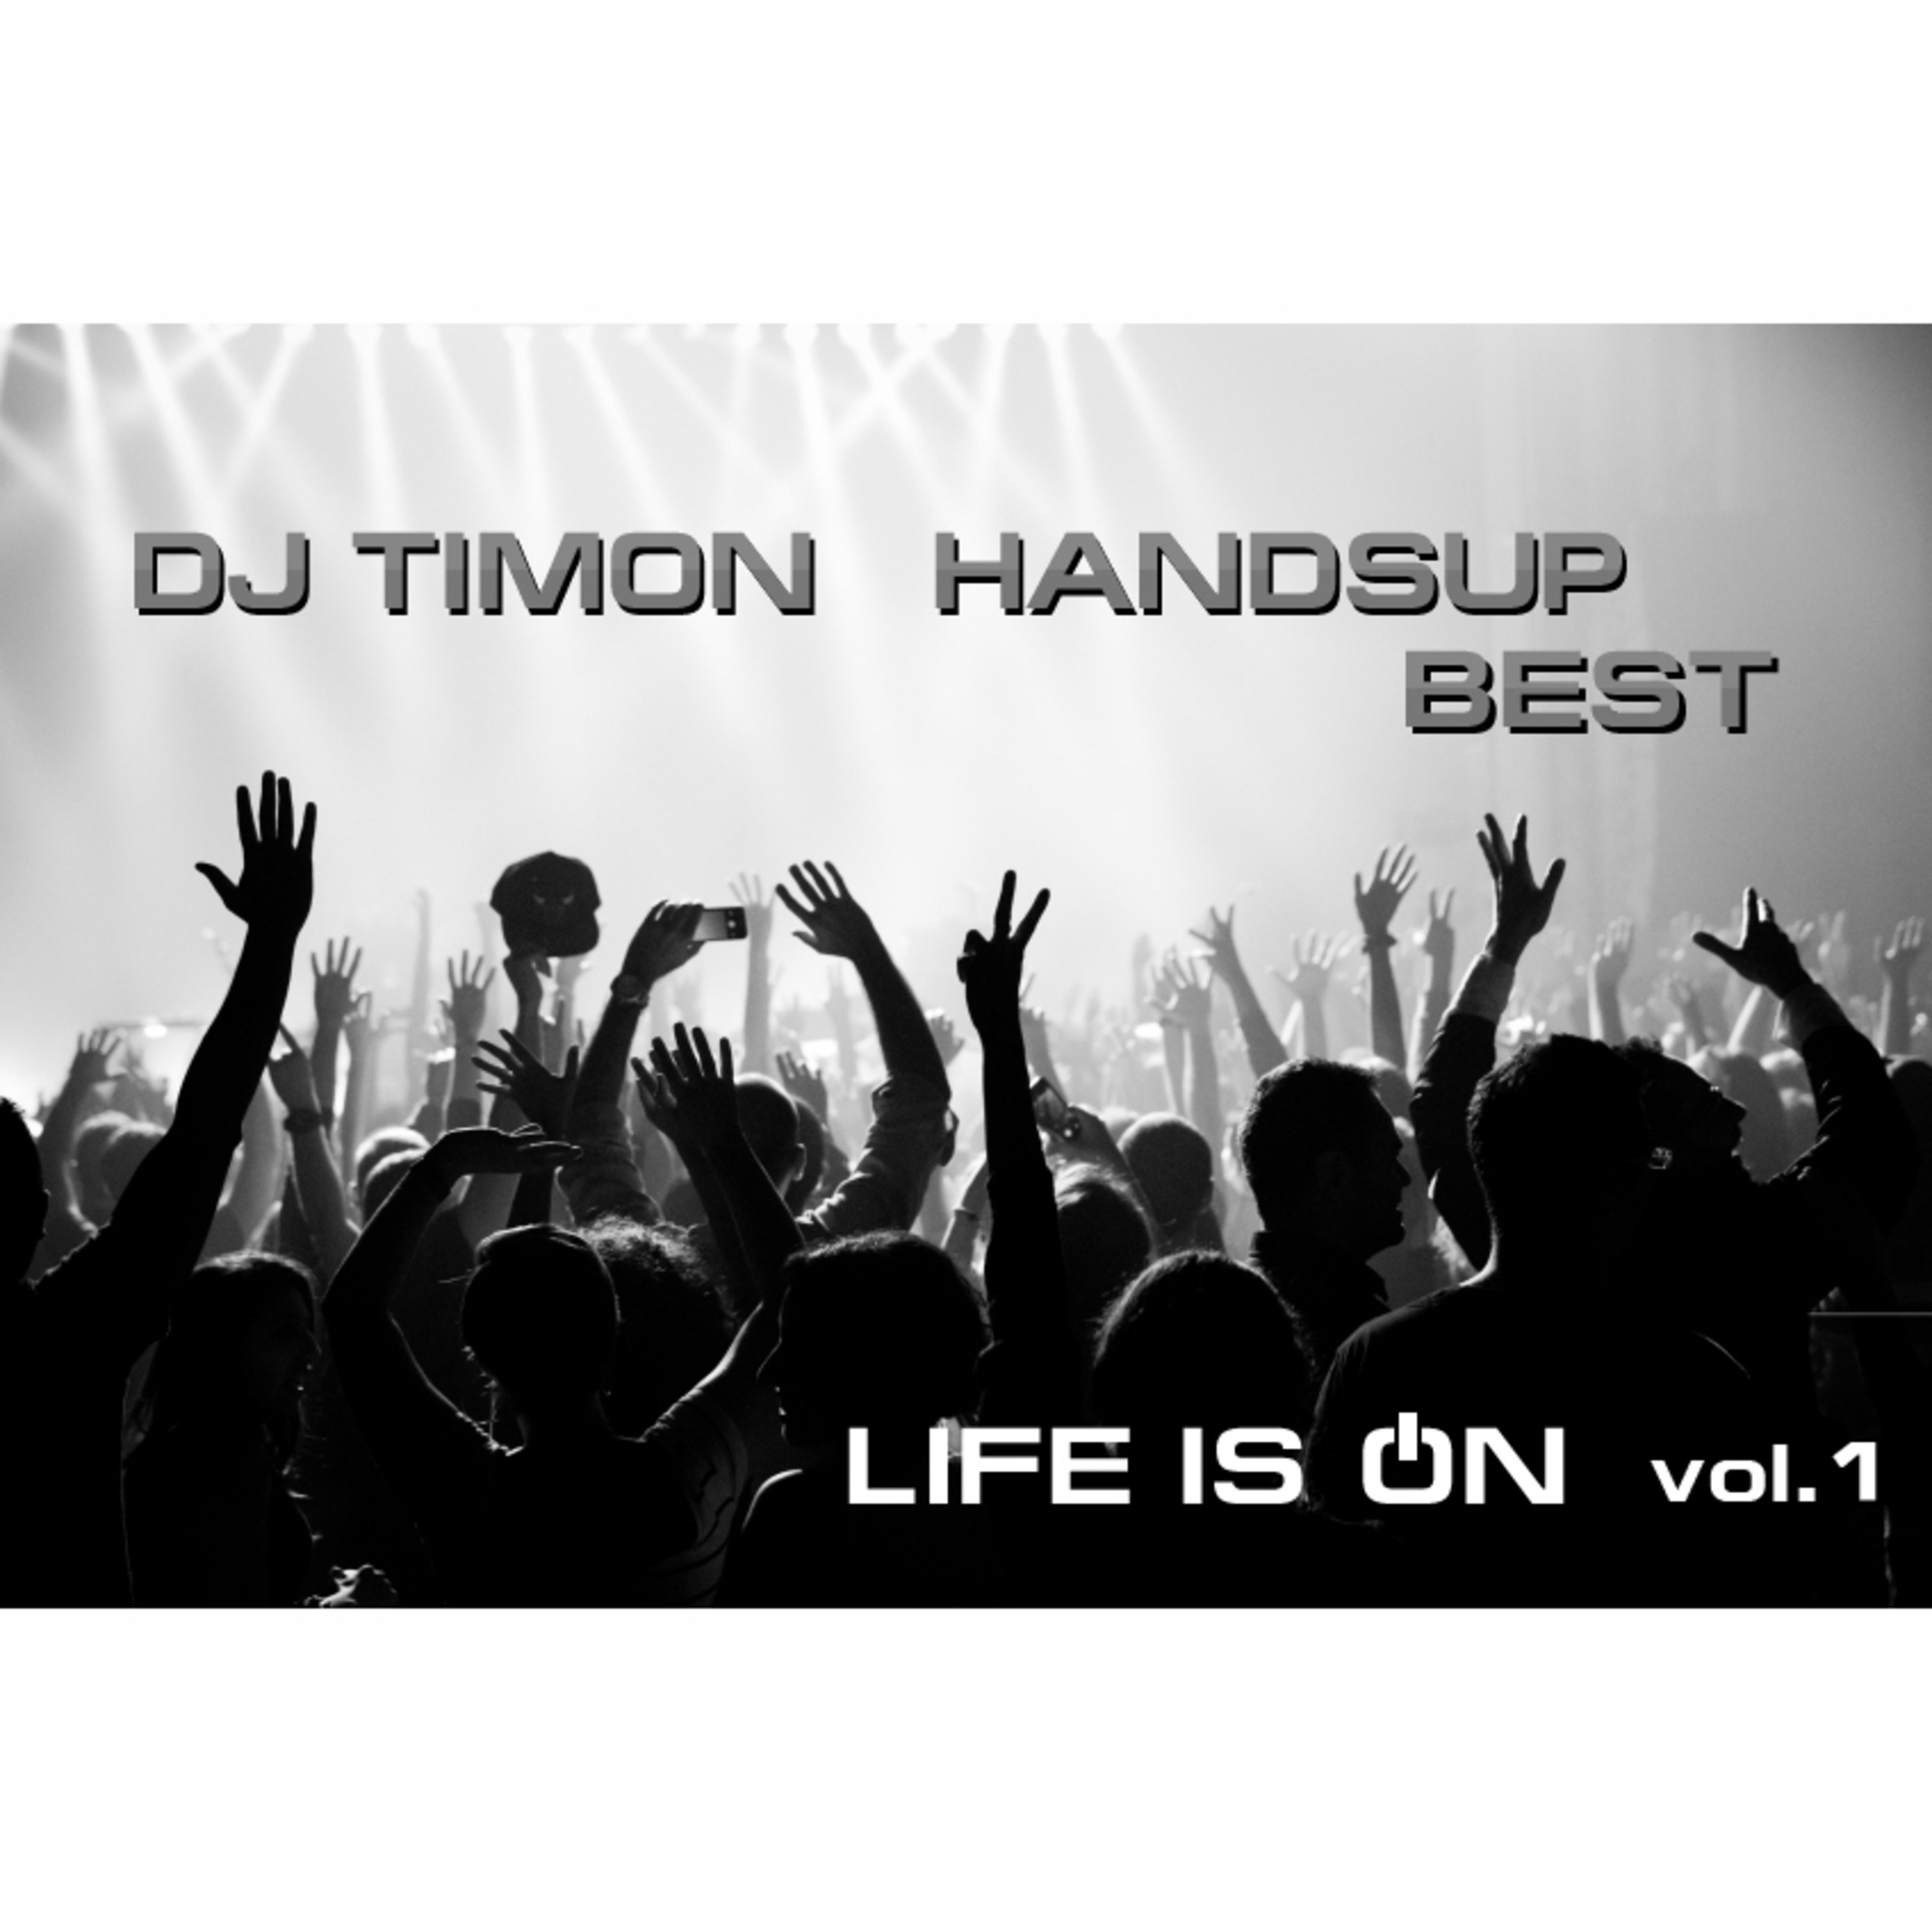 Hands Up Best vol.1 (Summer Is On 2015)